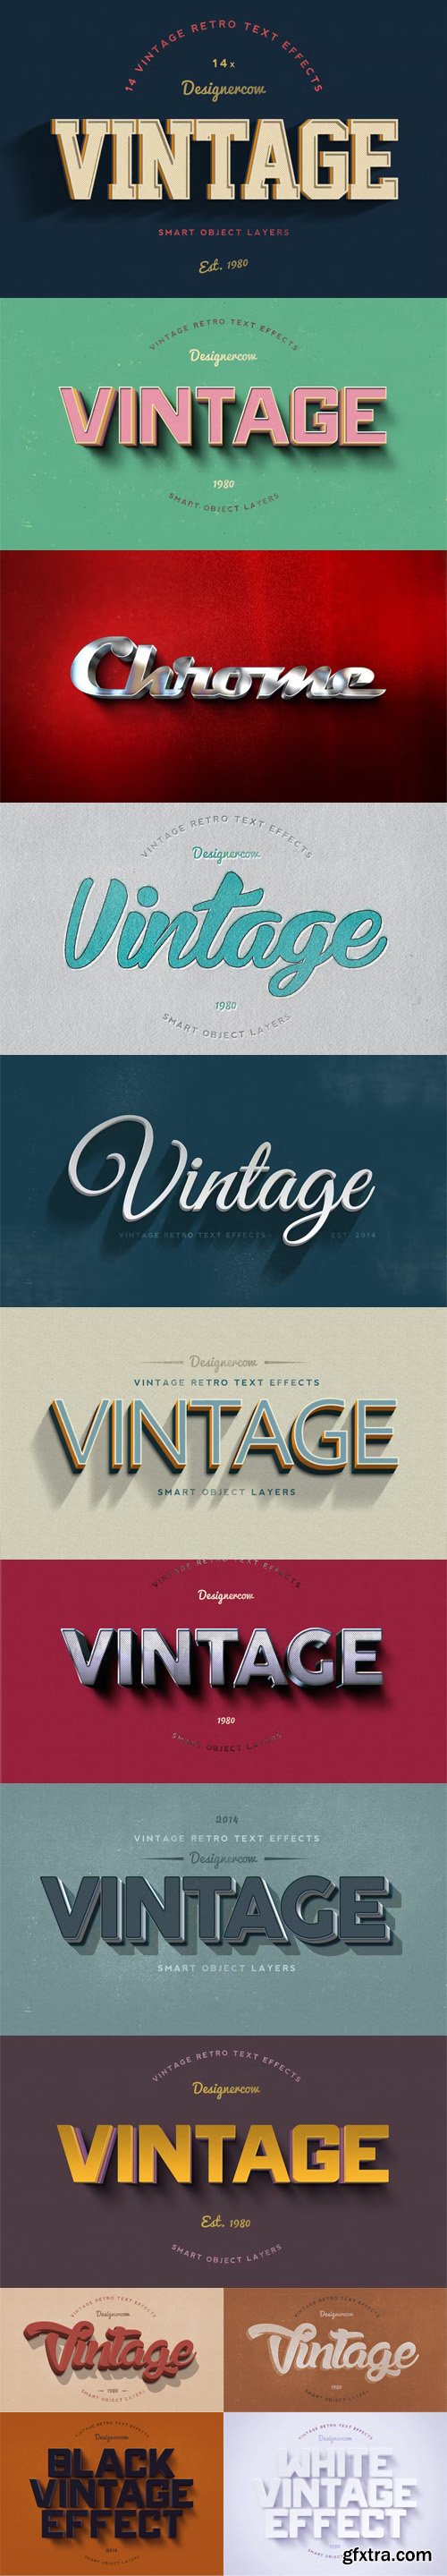 14 Vintage Retro Text Effects